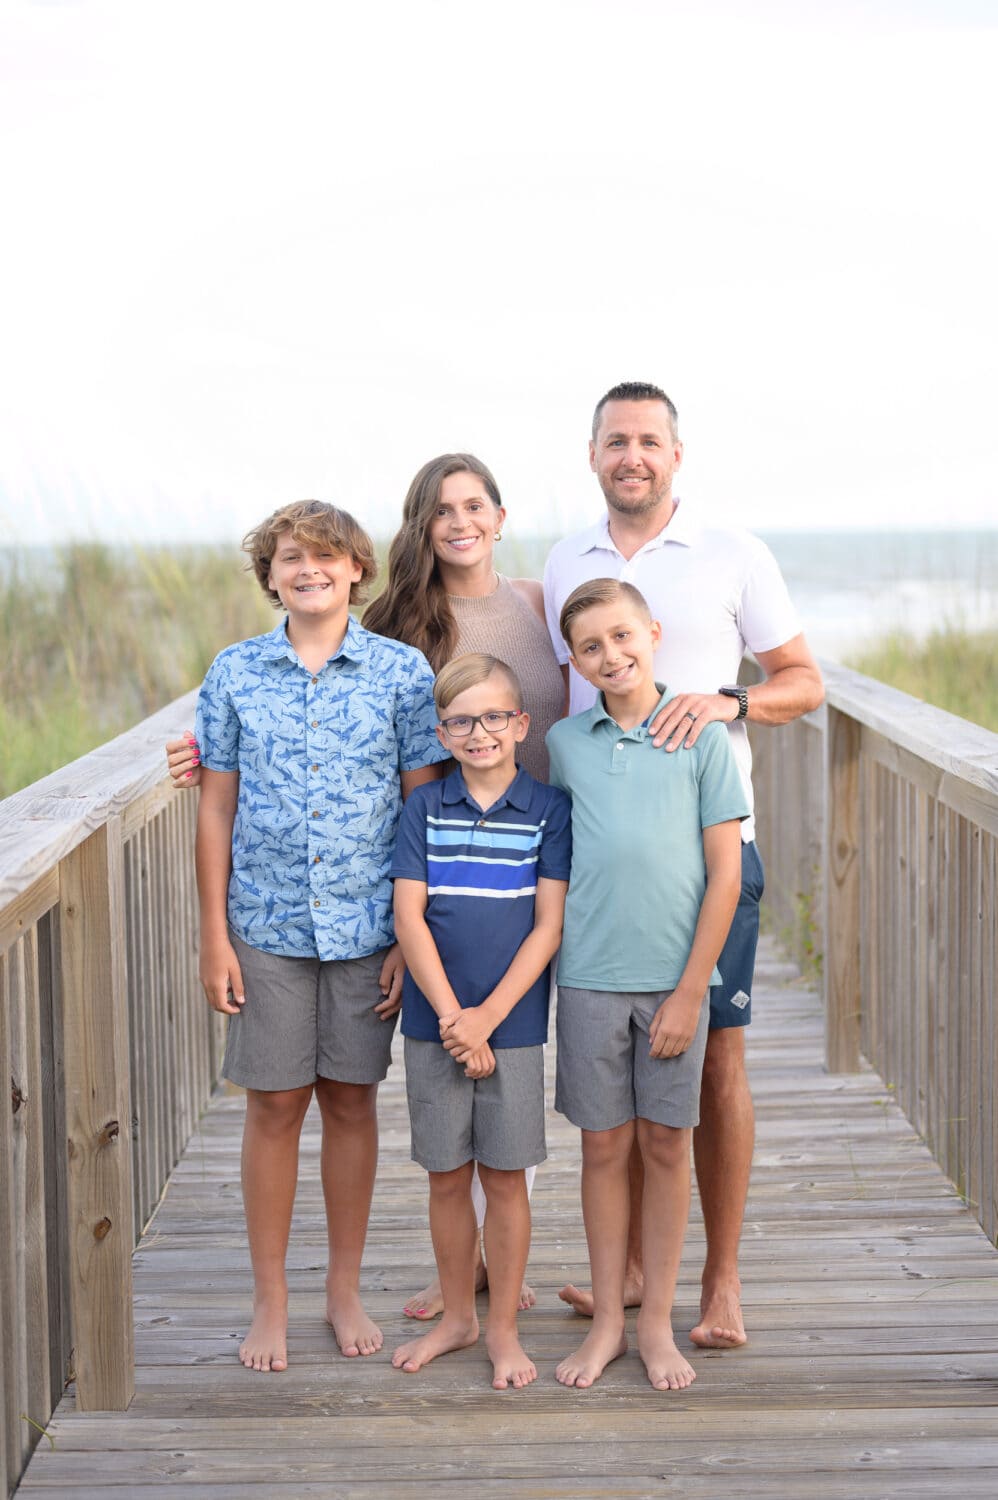 Family on the boardwalk - North Myrtle Beach